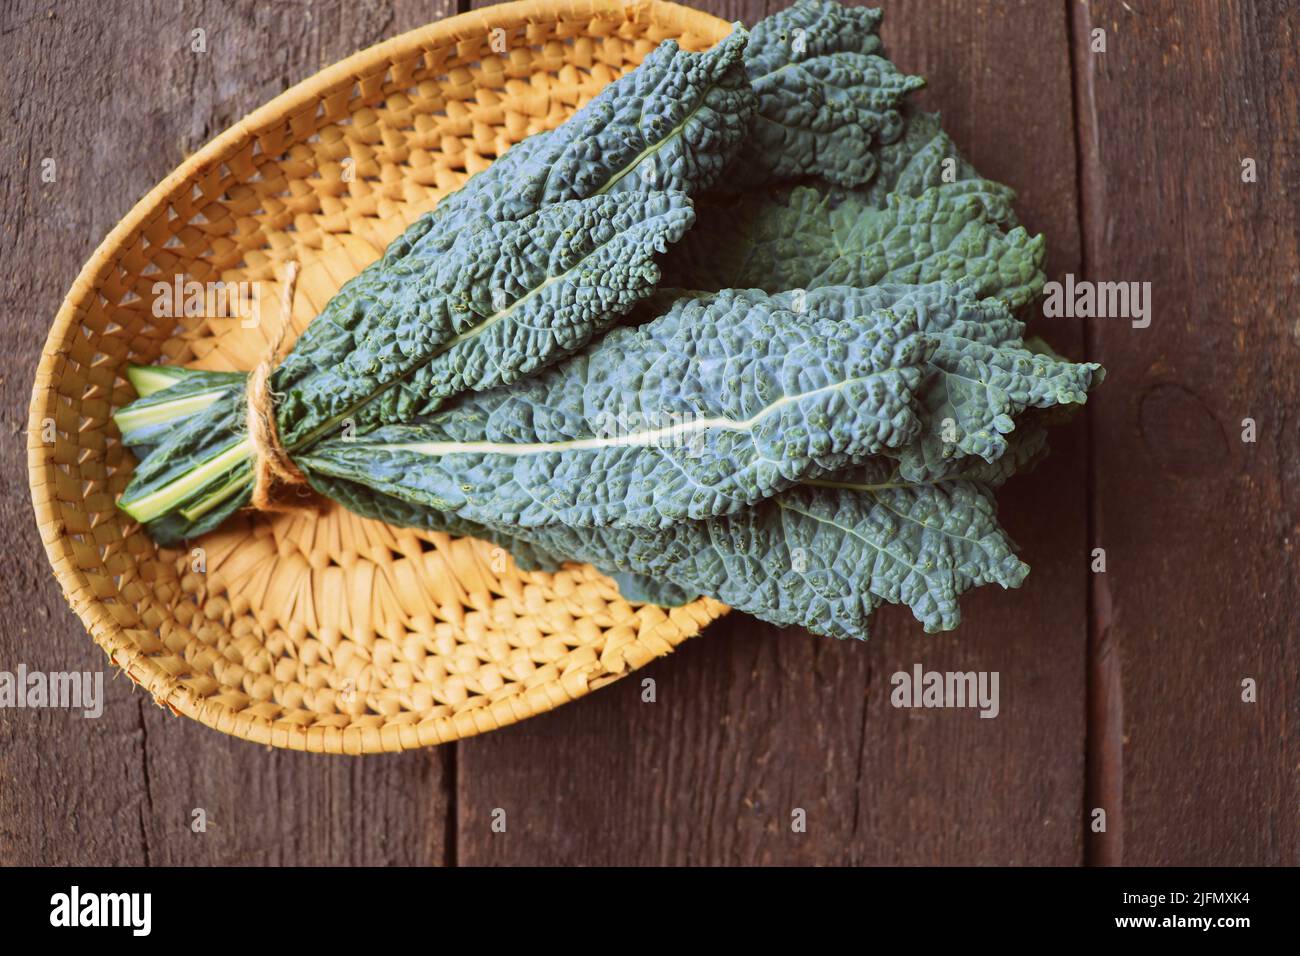 Fresh black cabbage leaves on wooden background. Black kale. Italian food. Healthy eating cooking step, ready to prepare vegetarian food Stock Photo